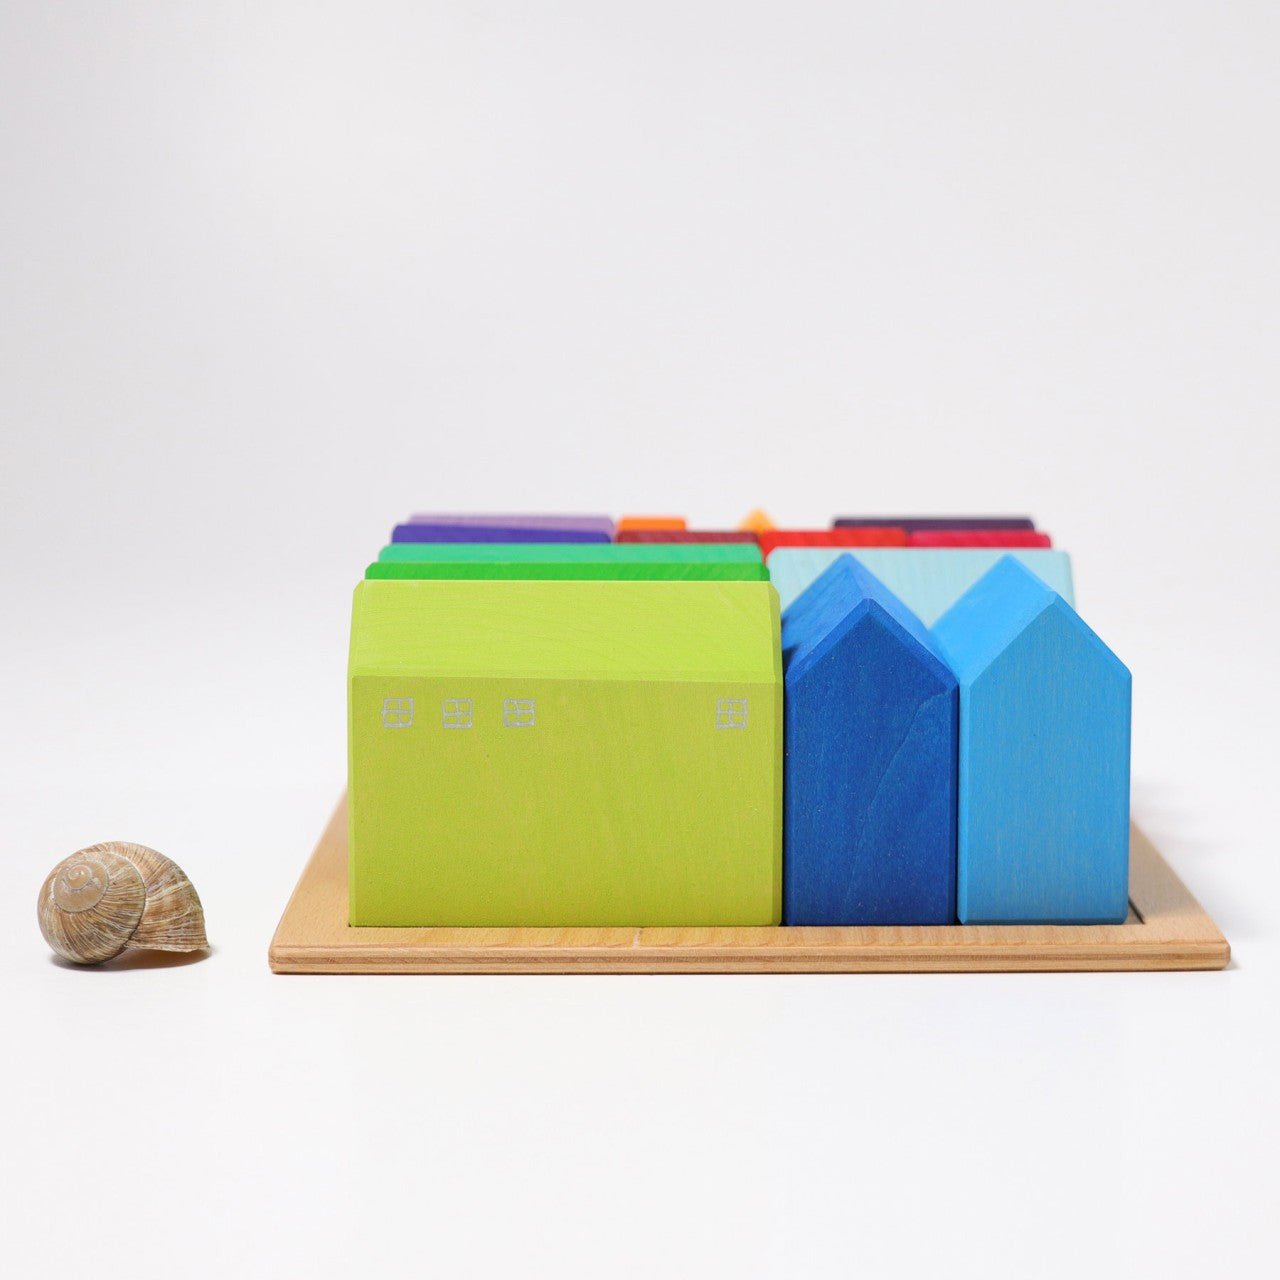 GRIMM'S | SMALL WOODEN HOUSES by GRIMM'S WOODEN TOYS - The Playful Collective